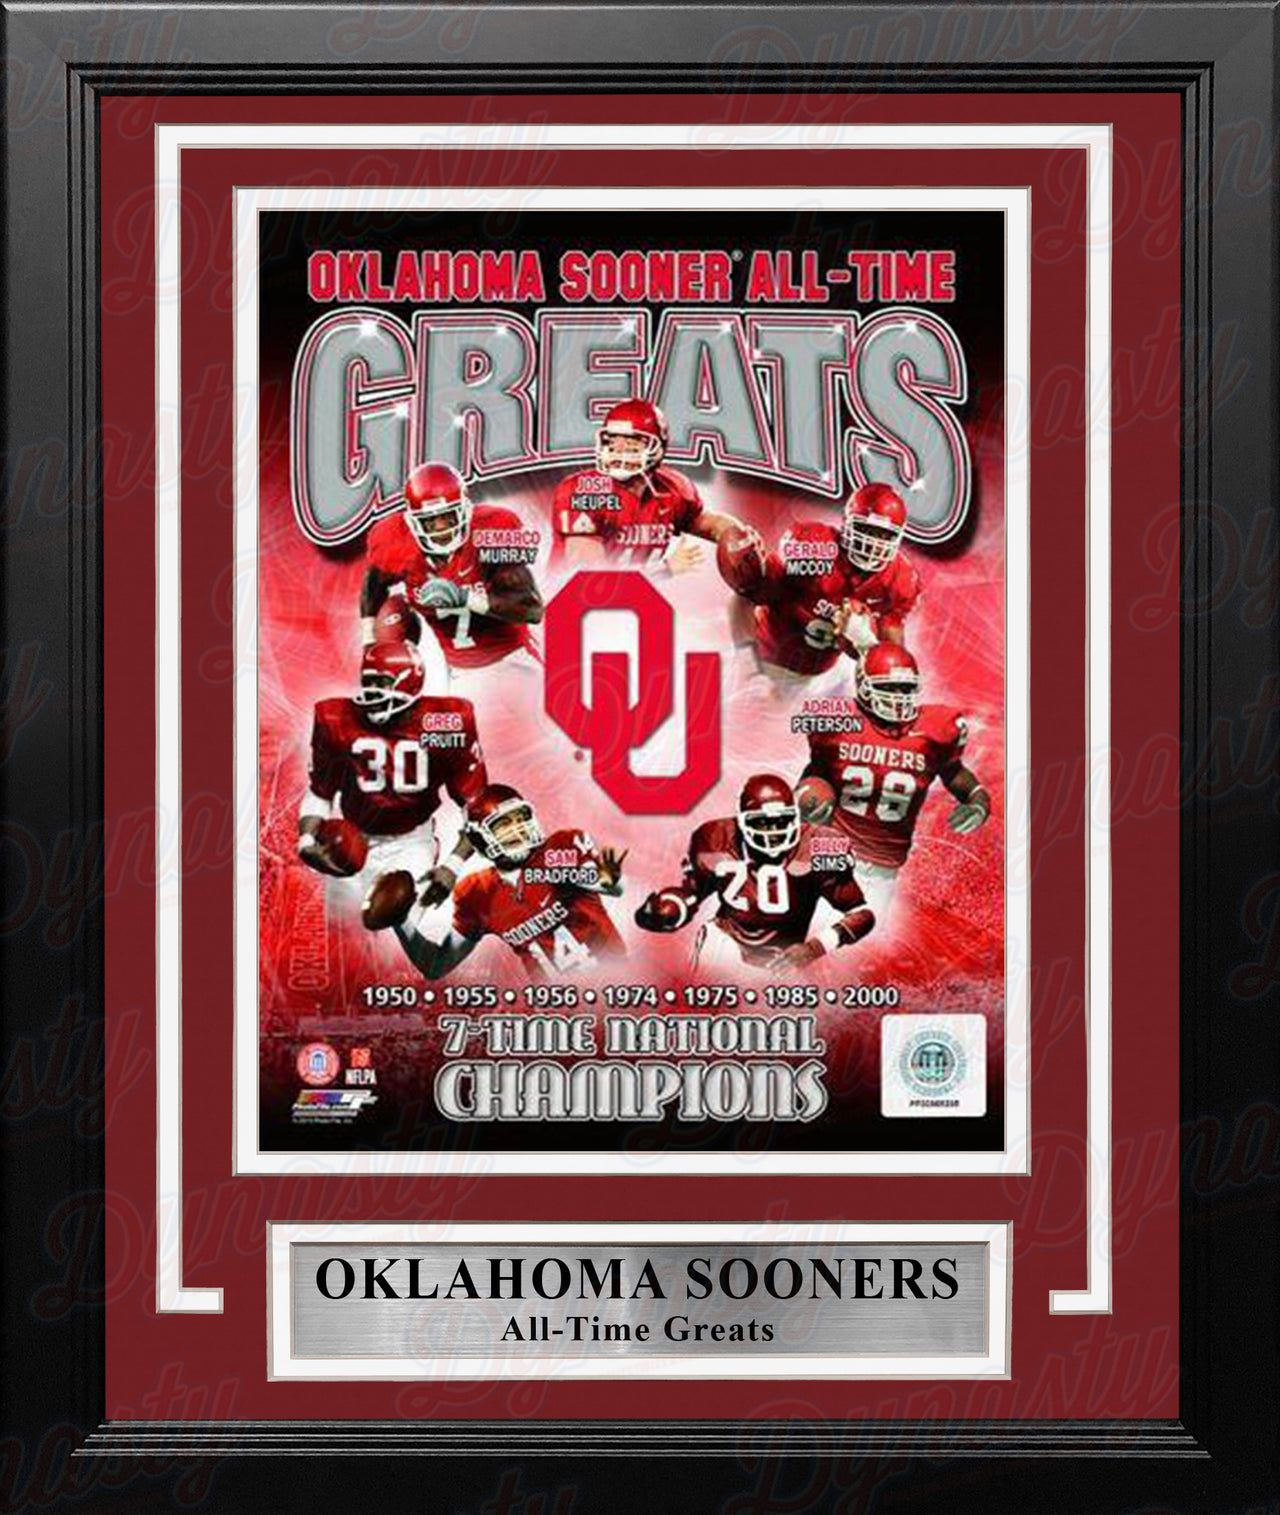 Oklahoma Sooners All-Time Greats NCAA College Football 8" x 10" Framed and Matted Photo - Dynasty Sports & Framing 